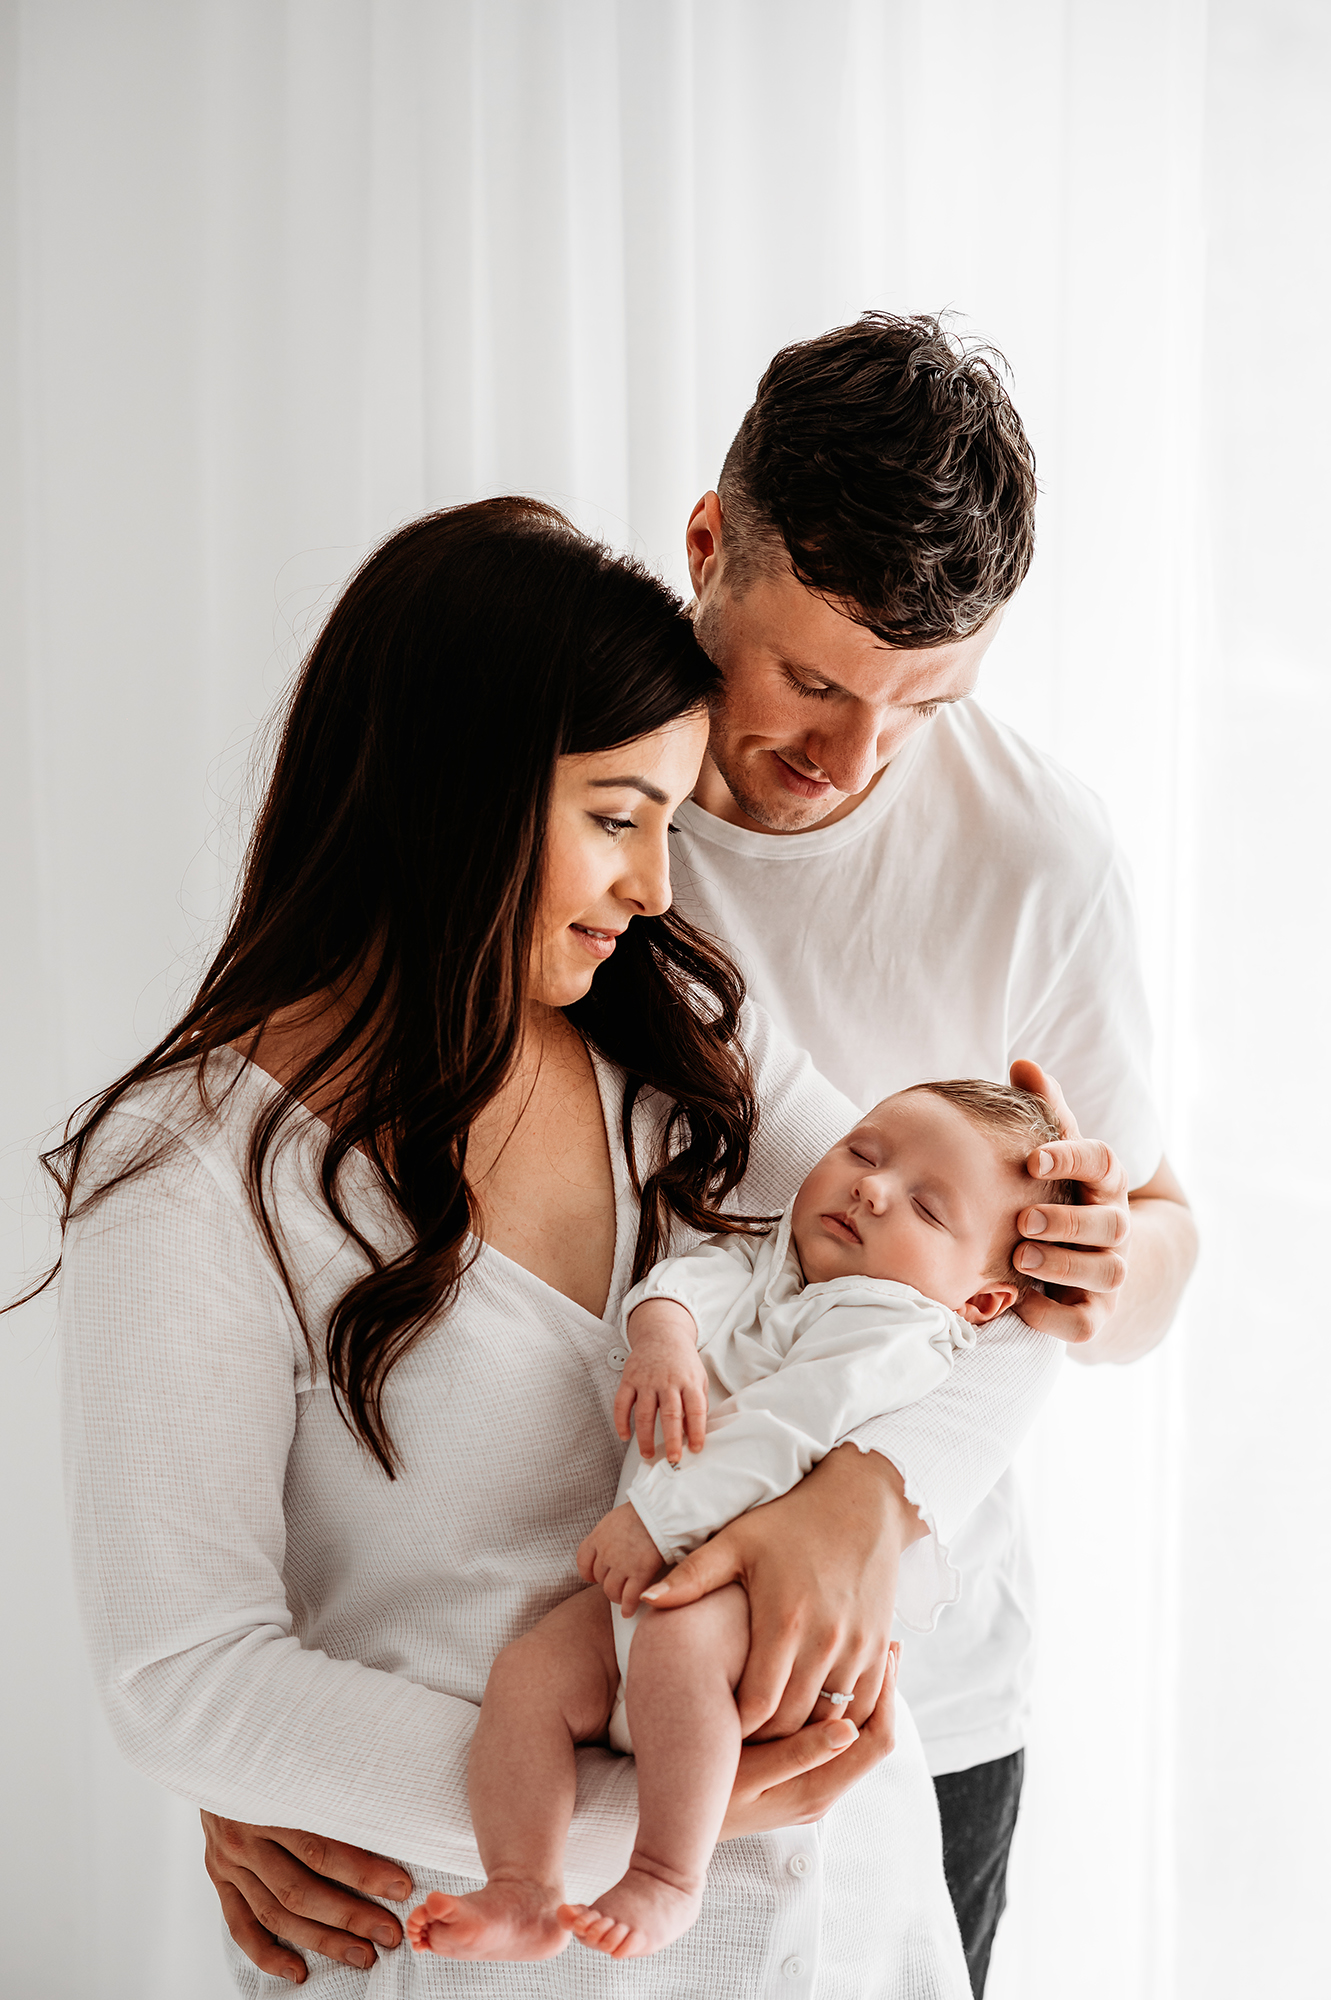 new family, older newborn photography session